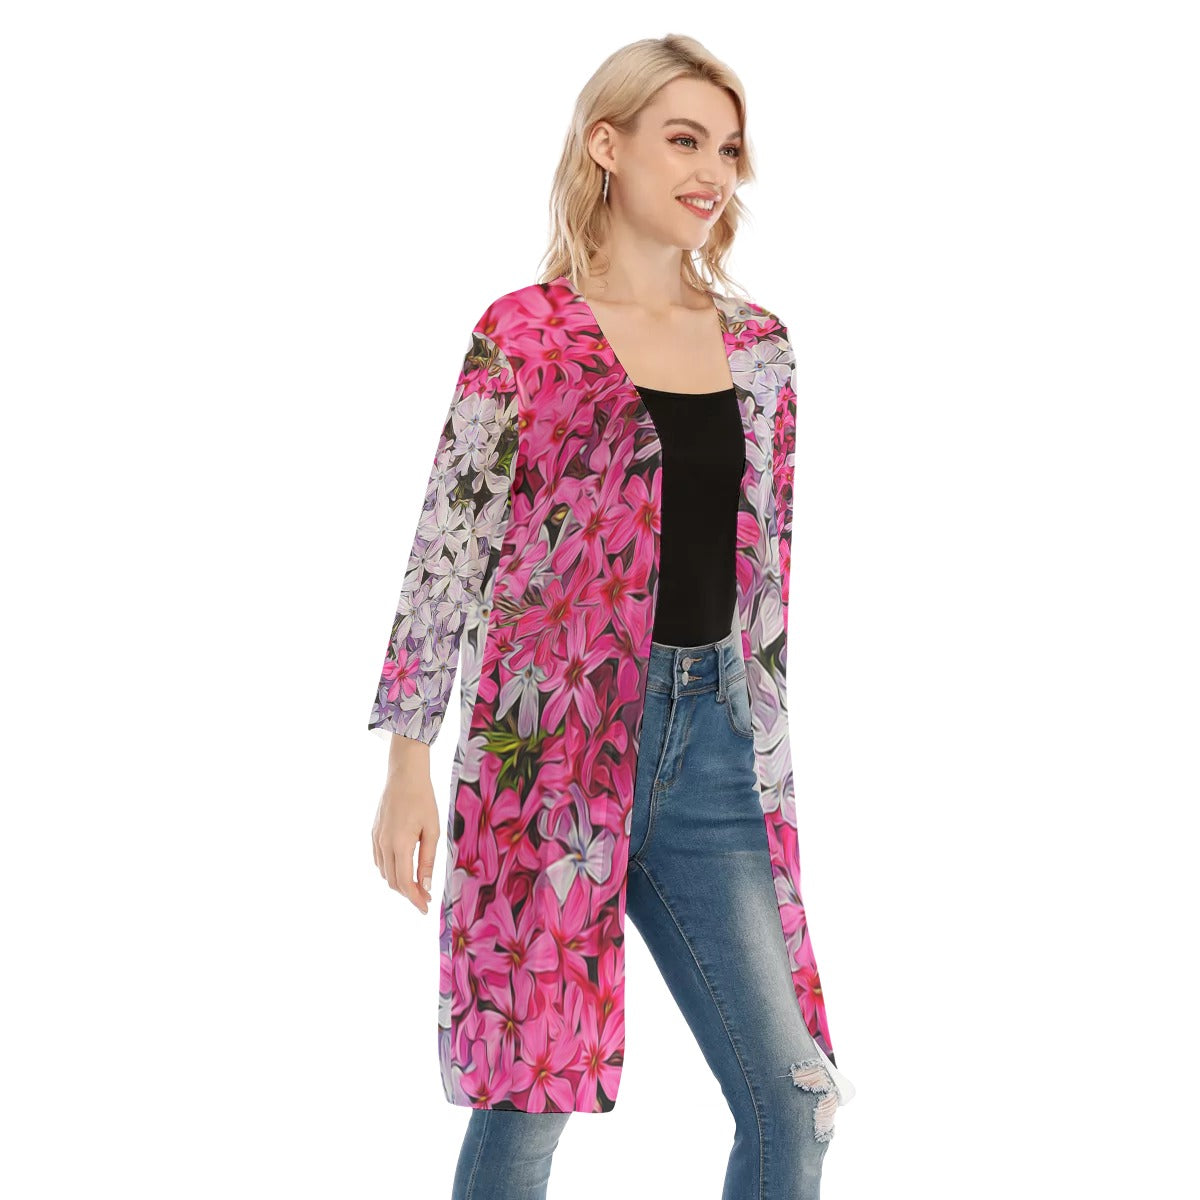 Pink and White Phlox All-Over Print Women's V-neck Mesh Cardigan